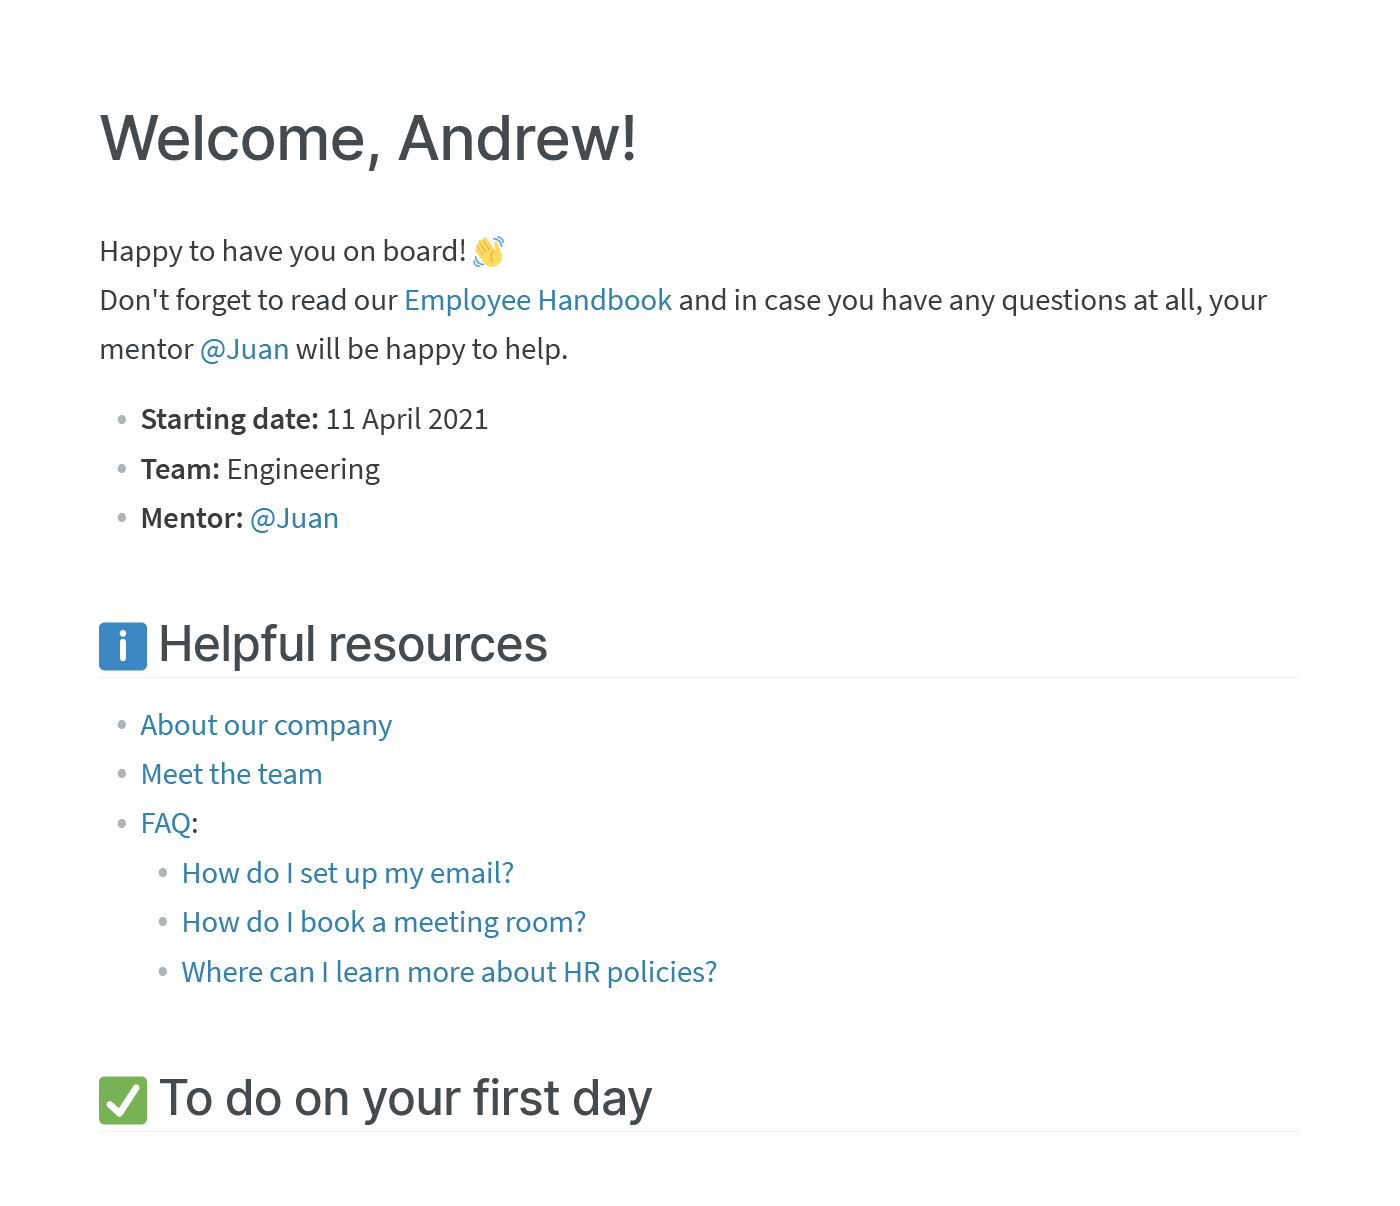 Onboarding checklist and welcome page for new hires